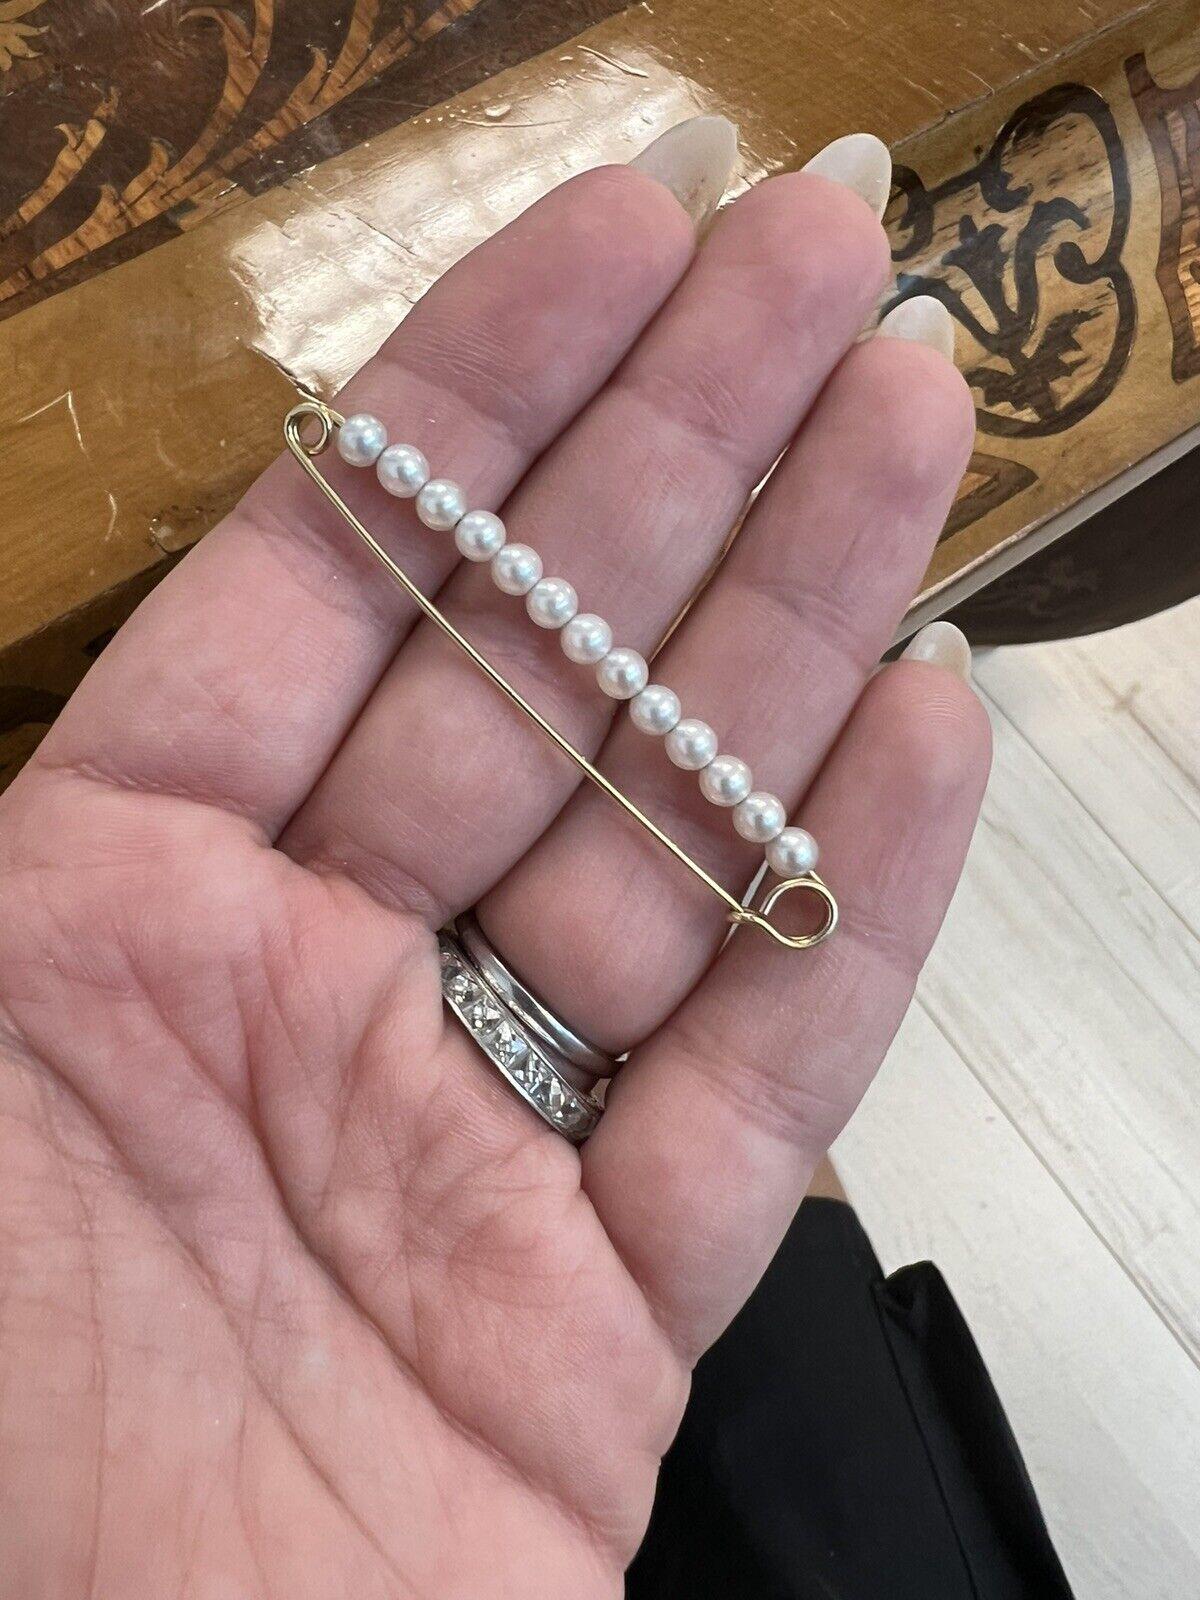 Tiffany & Co. Retro 14k Yellow Gold & Pearl Safety Pin Circa 1950s

Here is your chance to purchase a beautiful and highly collectible designer safety pin.  

The length is 2.25 inches.  The pearls are 1/8 of an inch.  The piece is hallmarked.  